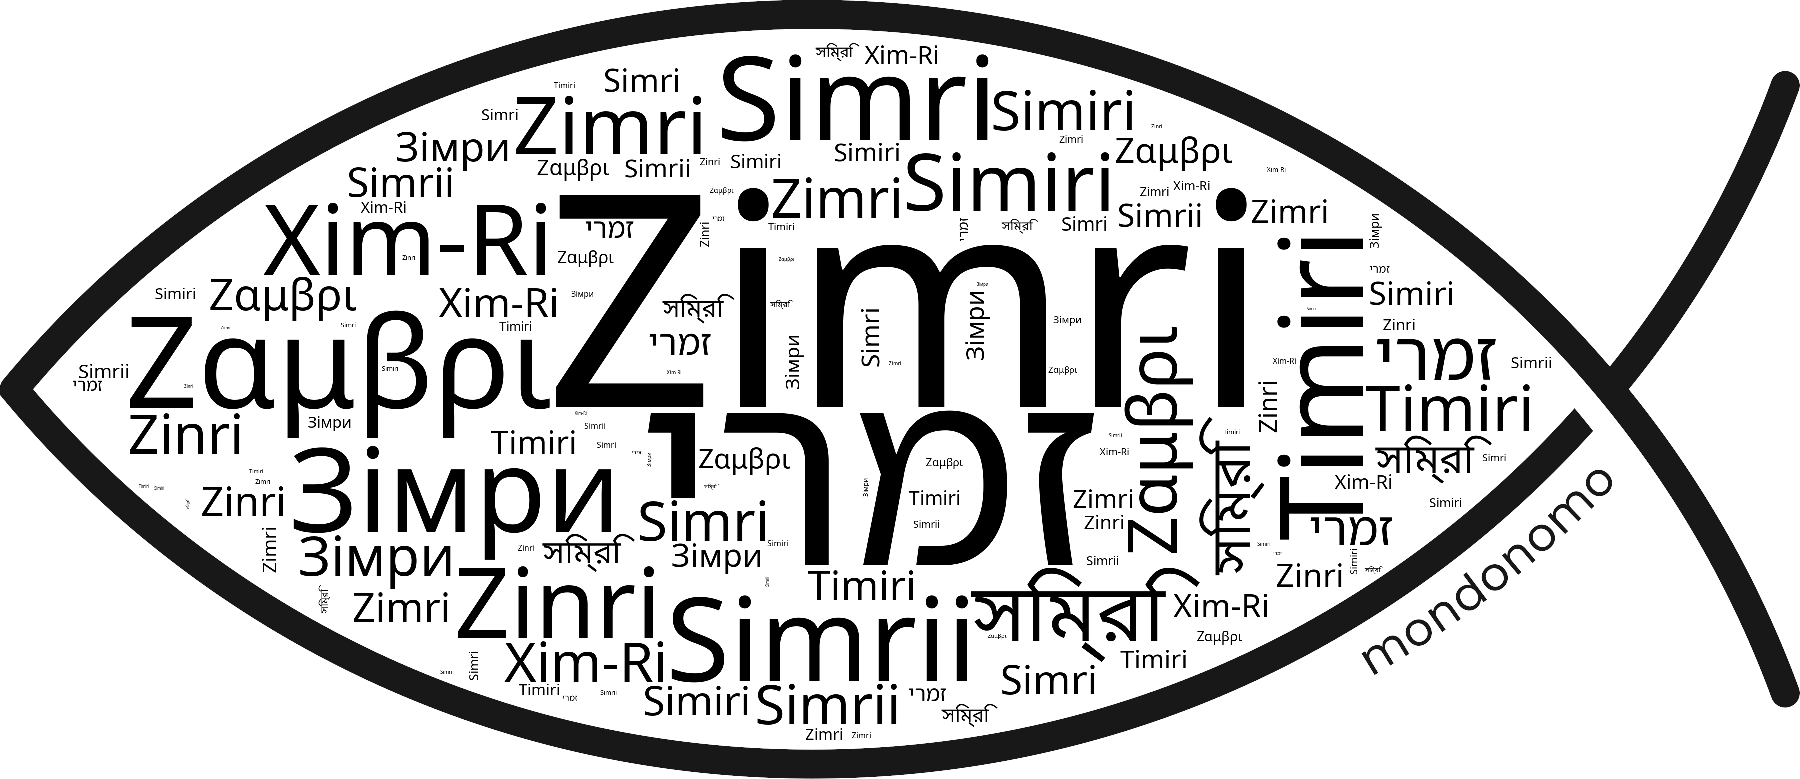 Name Zimri in the world's Bibles